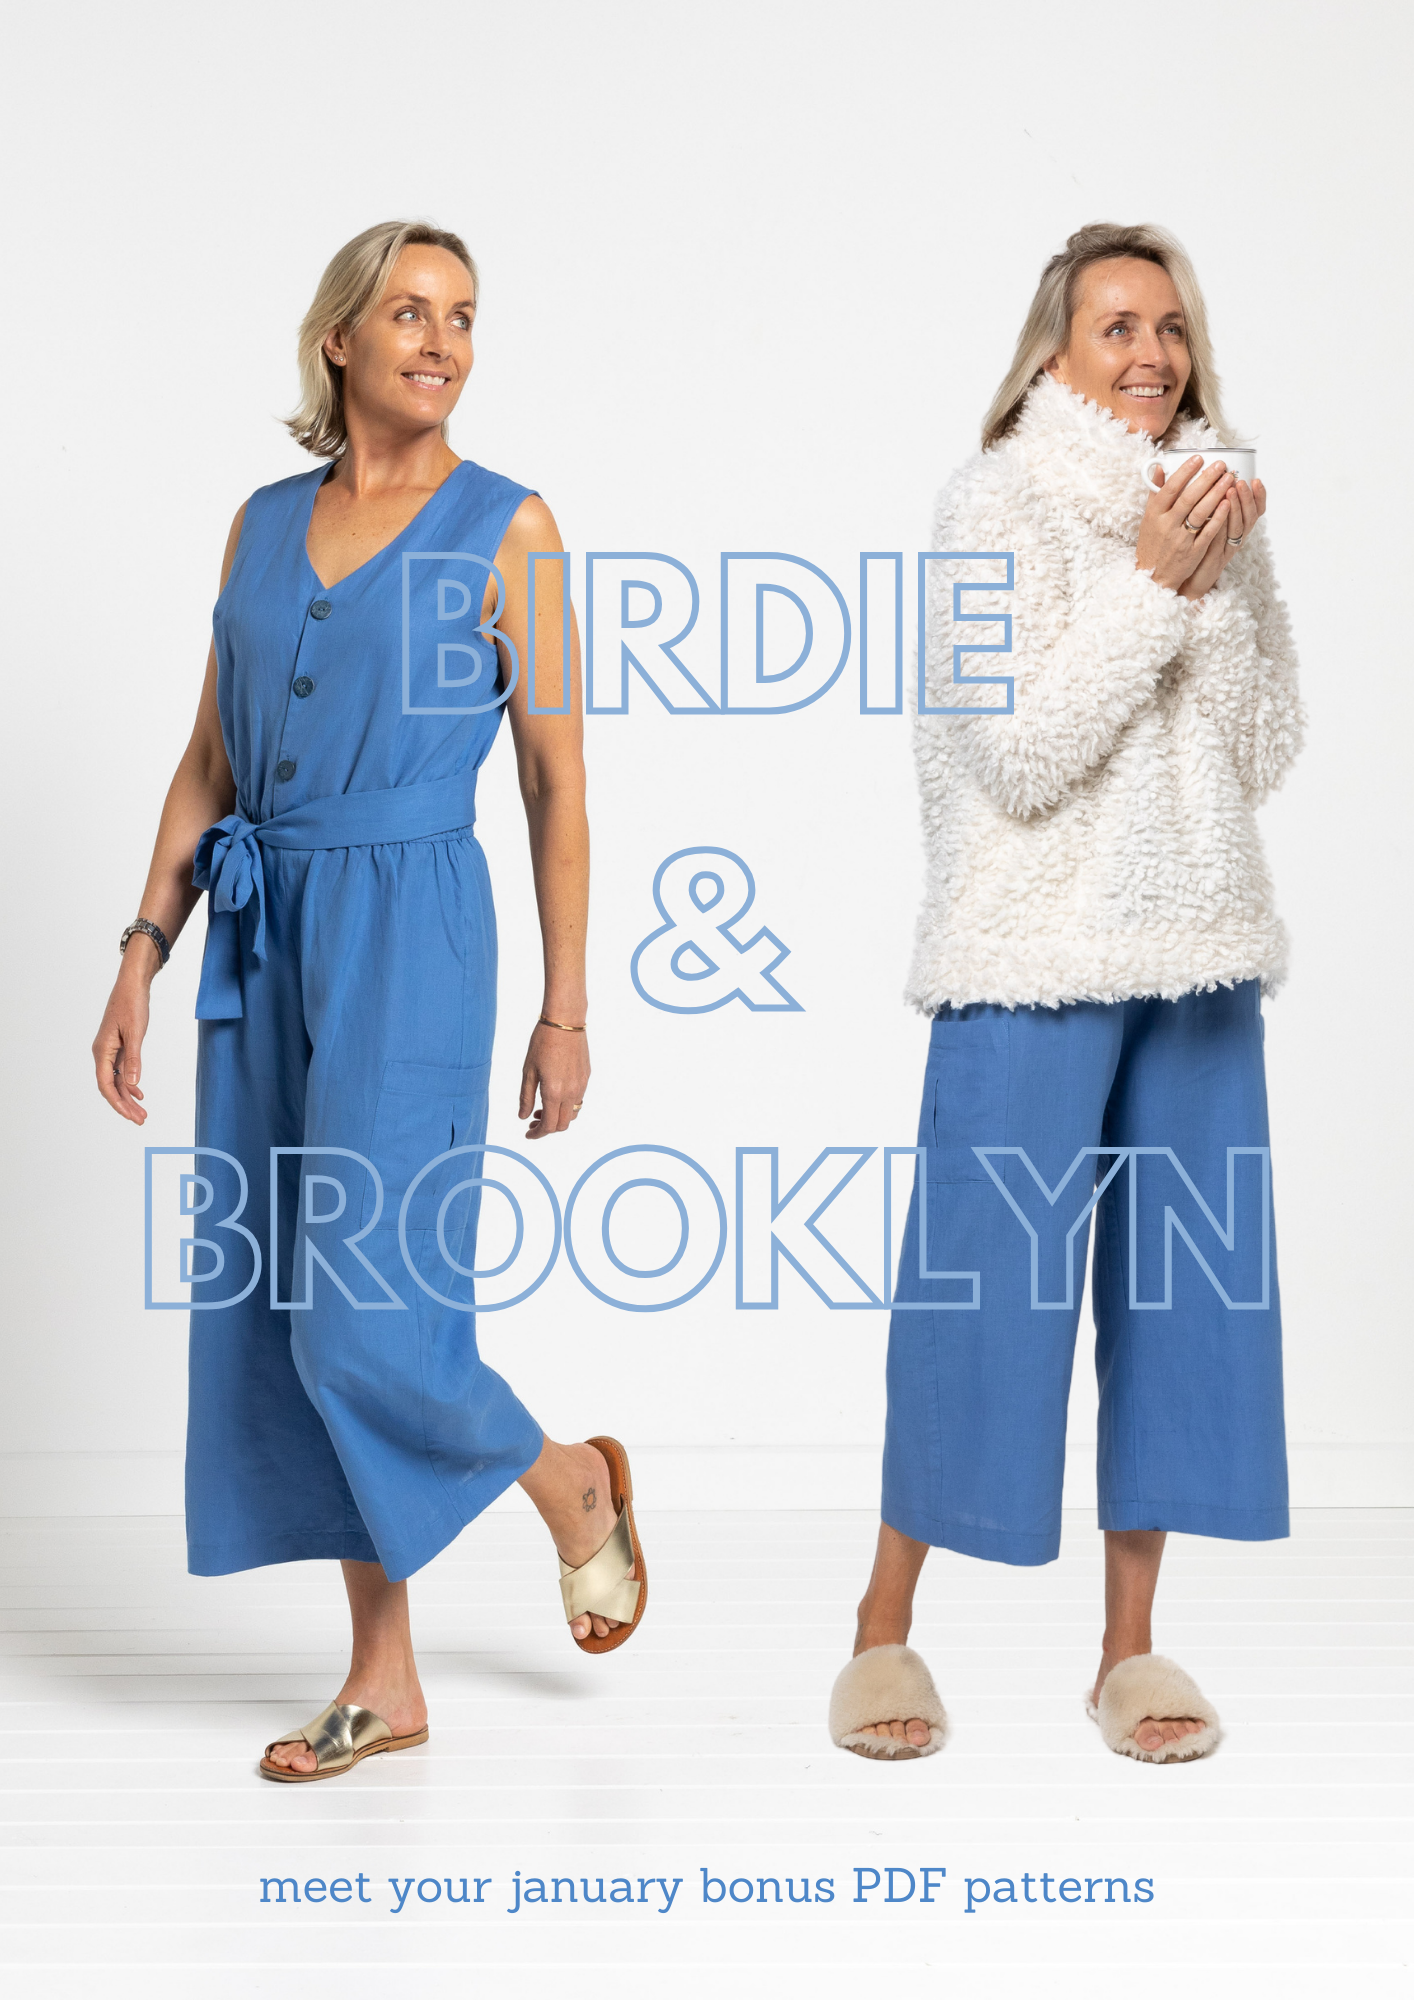 Meet Birdie and Brooklyn | Choose the Birdie or Brooklyn PDF pattern for free with any order on stylearc.com until January 31!